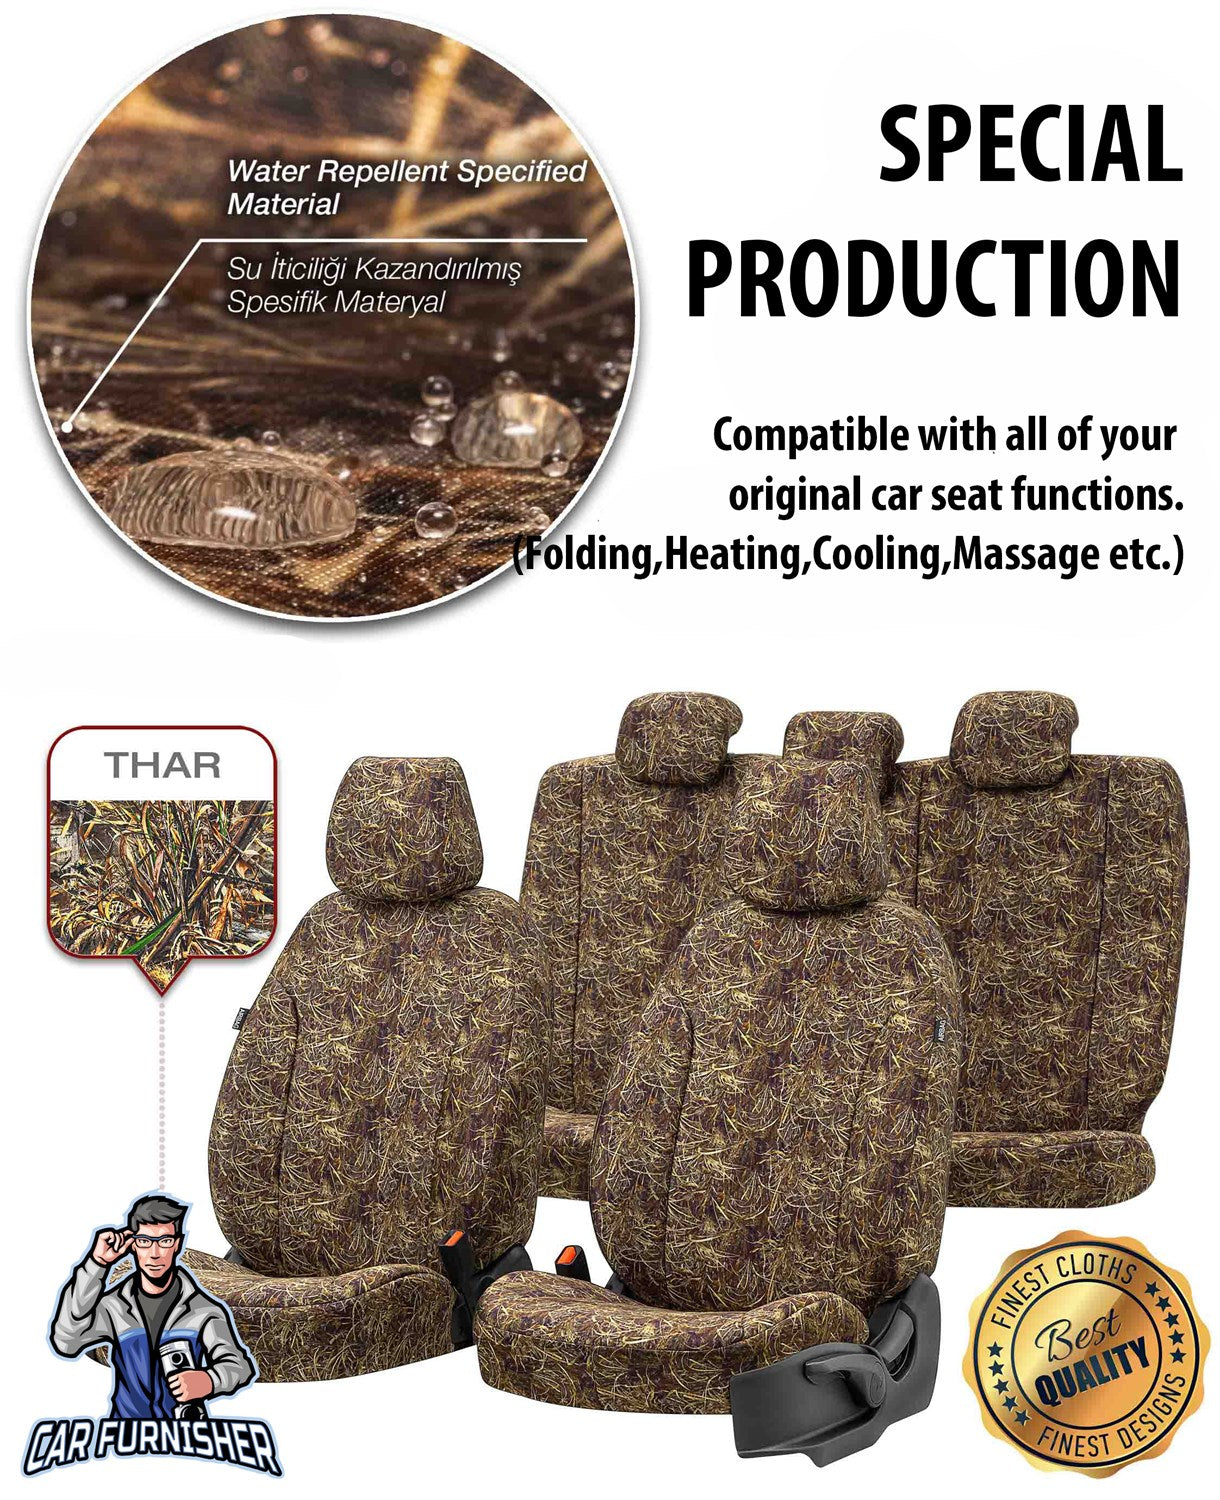 Subaru Forester Seat Cover Camouflage Waterproof Design Montblanc Camo Waterproof Fabric